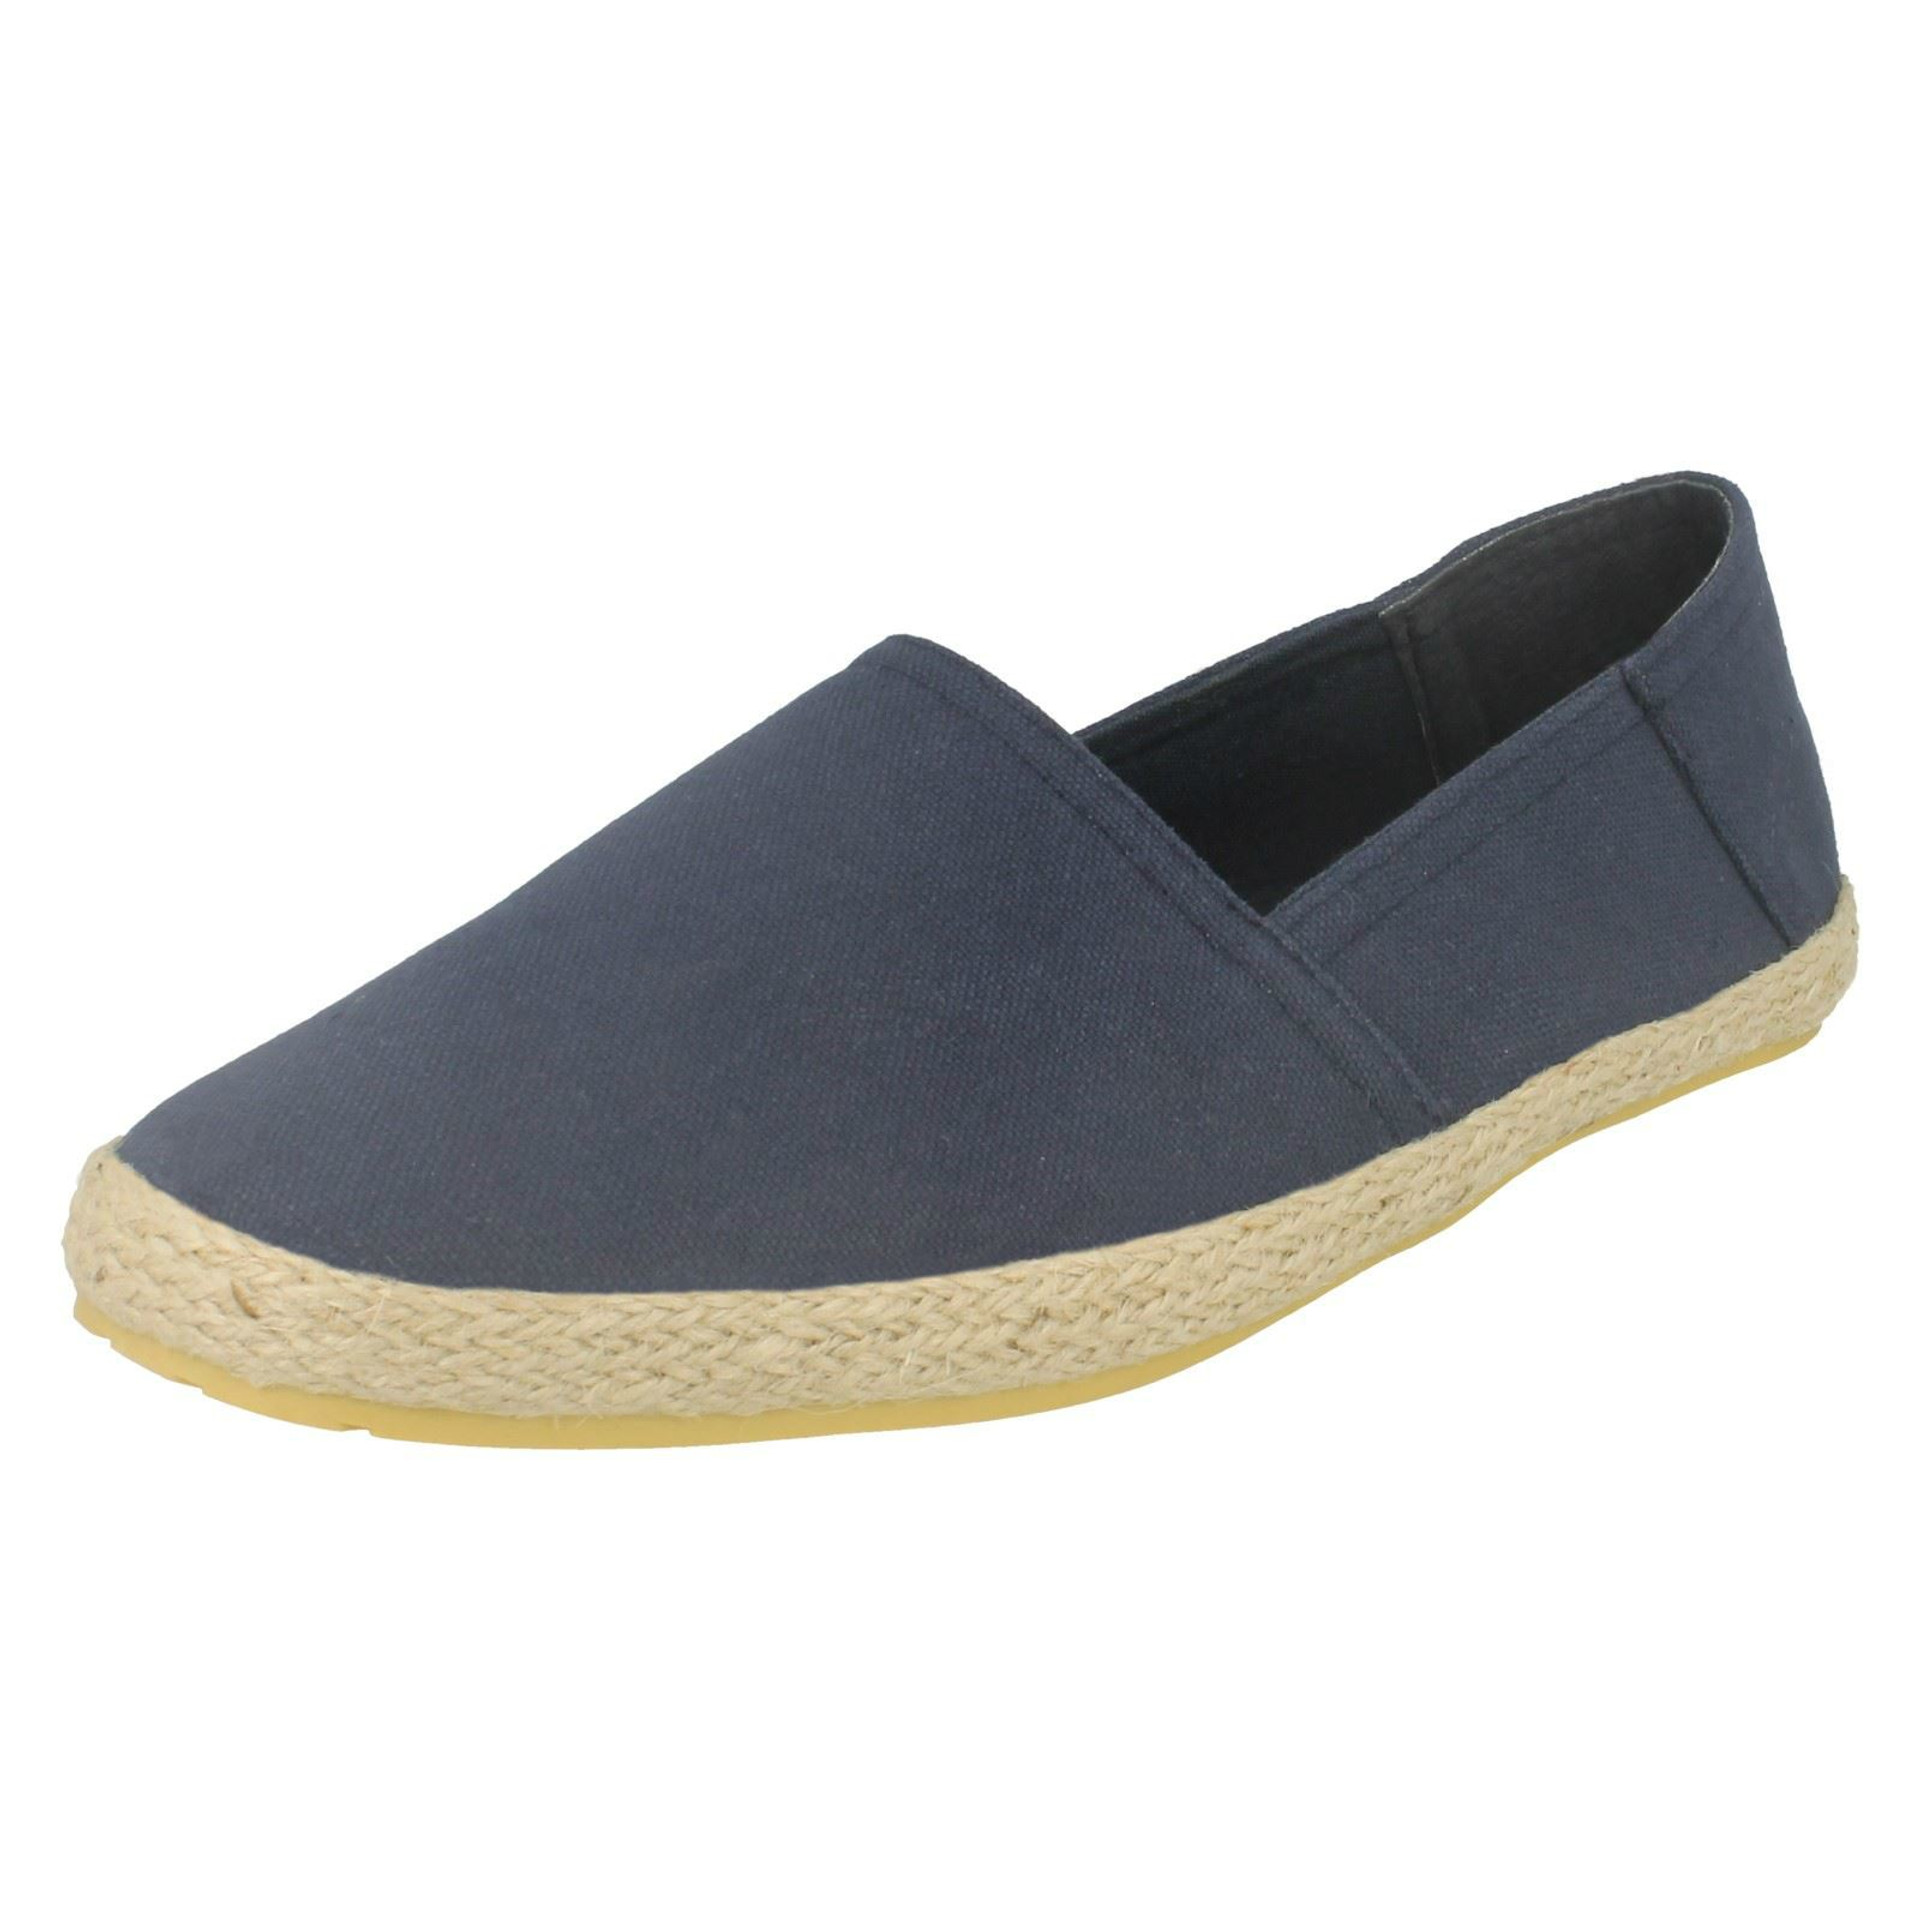 Mens Slip On Casual Espadrille Shoes